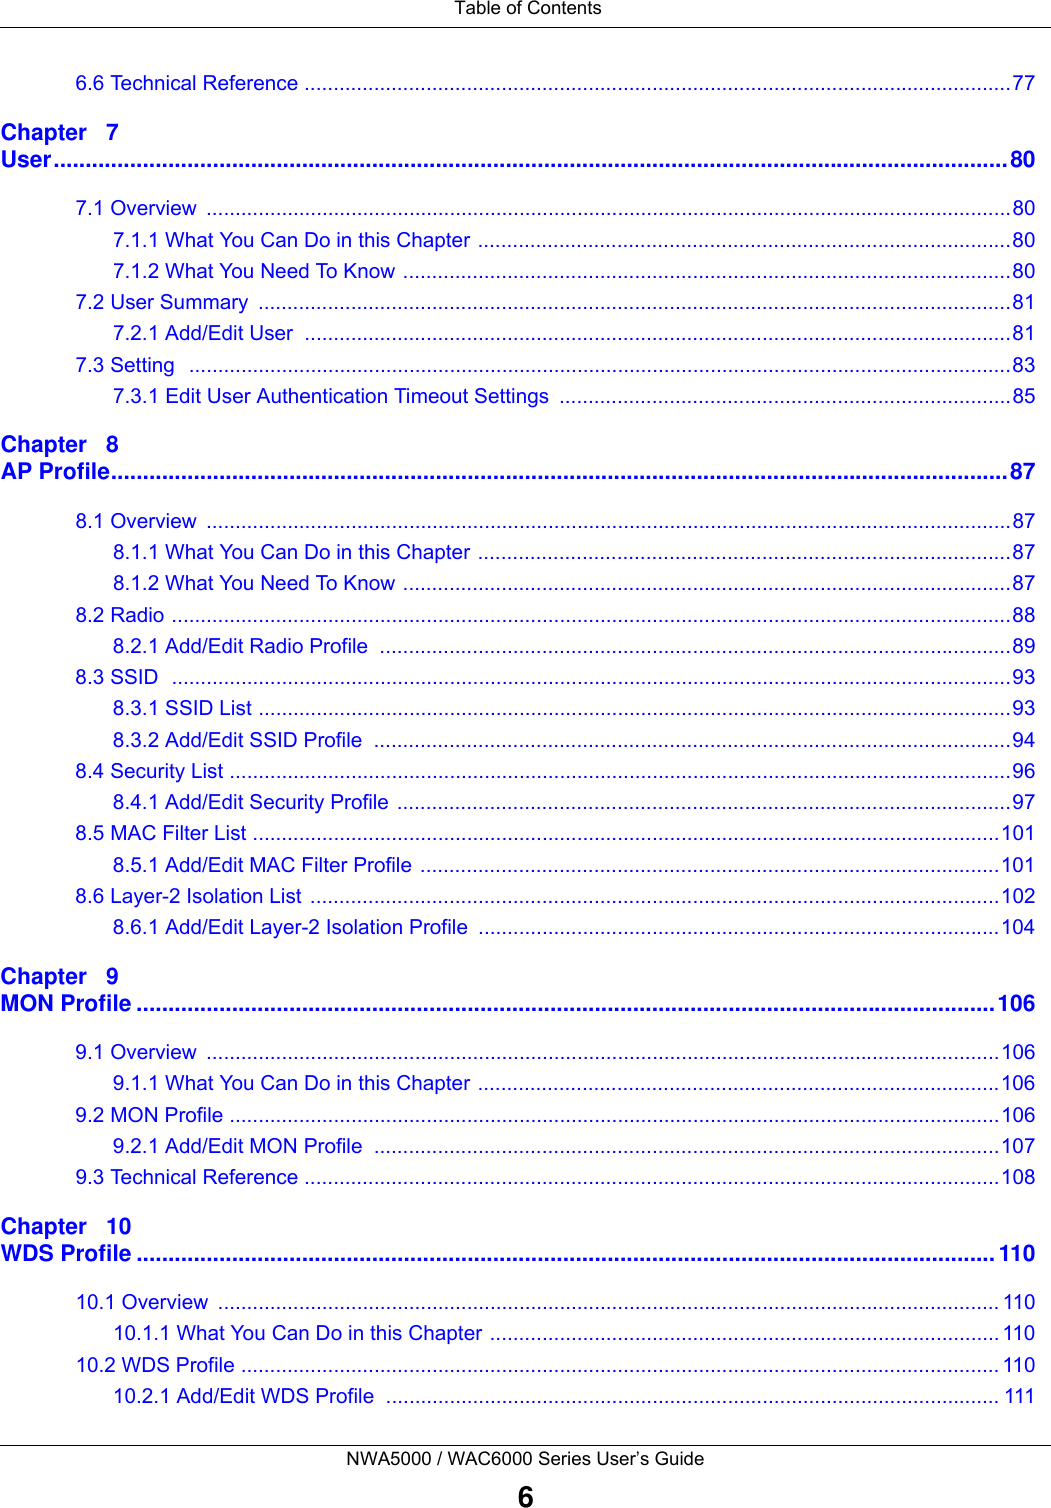 Table of ContentsNWA5000 / WAC6000 Series User’s Guide66.6 Technical Reference ..........................................................................................................................77Chapter   7User......................................................................................................................................................807.1 Overview  ...........................................................................................................................................807.1.1 What You Can Do in this Chapter ............................................................................................807.1.2 What You Need To Know .........................................................................................................807.2 User Summary  ..................................................................................................................................817.2.1 Add/Edit User  ..........................................................................................................................817.3 Setting   ..............................................................................................................................................837.3.1 Edit User Authentication Timeout Settings  ..............................................................................85Chapter   8AP Profile.............................................................................................................................................878.1 Overview  ...........................................................................................................................................878.1.1 What You Can Do in this Chapter ............................................................................................878.1.2 What You Need To Know .........................................................................................................878.2 Radio .................................................................................................................................................888.2.1 Add/Edit Radio Profile  .............................................................................................................898.3 SSID  .................................................................................................................................................938.3.1 SSID List ..................................................................................................................................938.3.2 Add/Edit SSID Profile  ..............................................................................................................948.4 Security List .......................................................................................................................................968.4.1 Add/Edit Security Profile ..........................................................................................................978.5 MAC Filter List .................................................................................................................................1018.5.1 Add/Edit MAC Filter Profile ....................................................................................................1018.6 Layer-2 Isolation List .......................................................................................................................1028.6.1 Add/Edit Layer-2 Isolation Profile ..........................................................................................104Chapter   9MON Profile .......................................................................................................................................1069.1 Overview  .........................................................................................................................................1069.1.1 What You Can Do in this Chapter ..........................................................................................1069.2 MON Profile .....................................................................................................................................1069.2.1 Add/Edit MON Profile  ............................................................................................................1079.3 Technical Reference ........................................................................................................................108Chapter   10WDS Profile ....................................................................................................................................... 11010.1 Overview  ....................................................................................................................................... 11010.1.1 What You Can Do in this Chapter ........................................................................................ 11010.2 WDS Profile ................................................................................................................................... 11010.2.1 Add/Edit WDS Profile  .......................................................................................................... 111